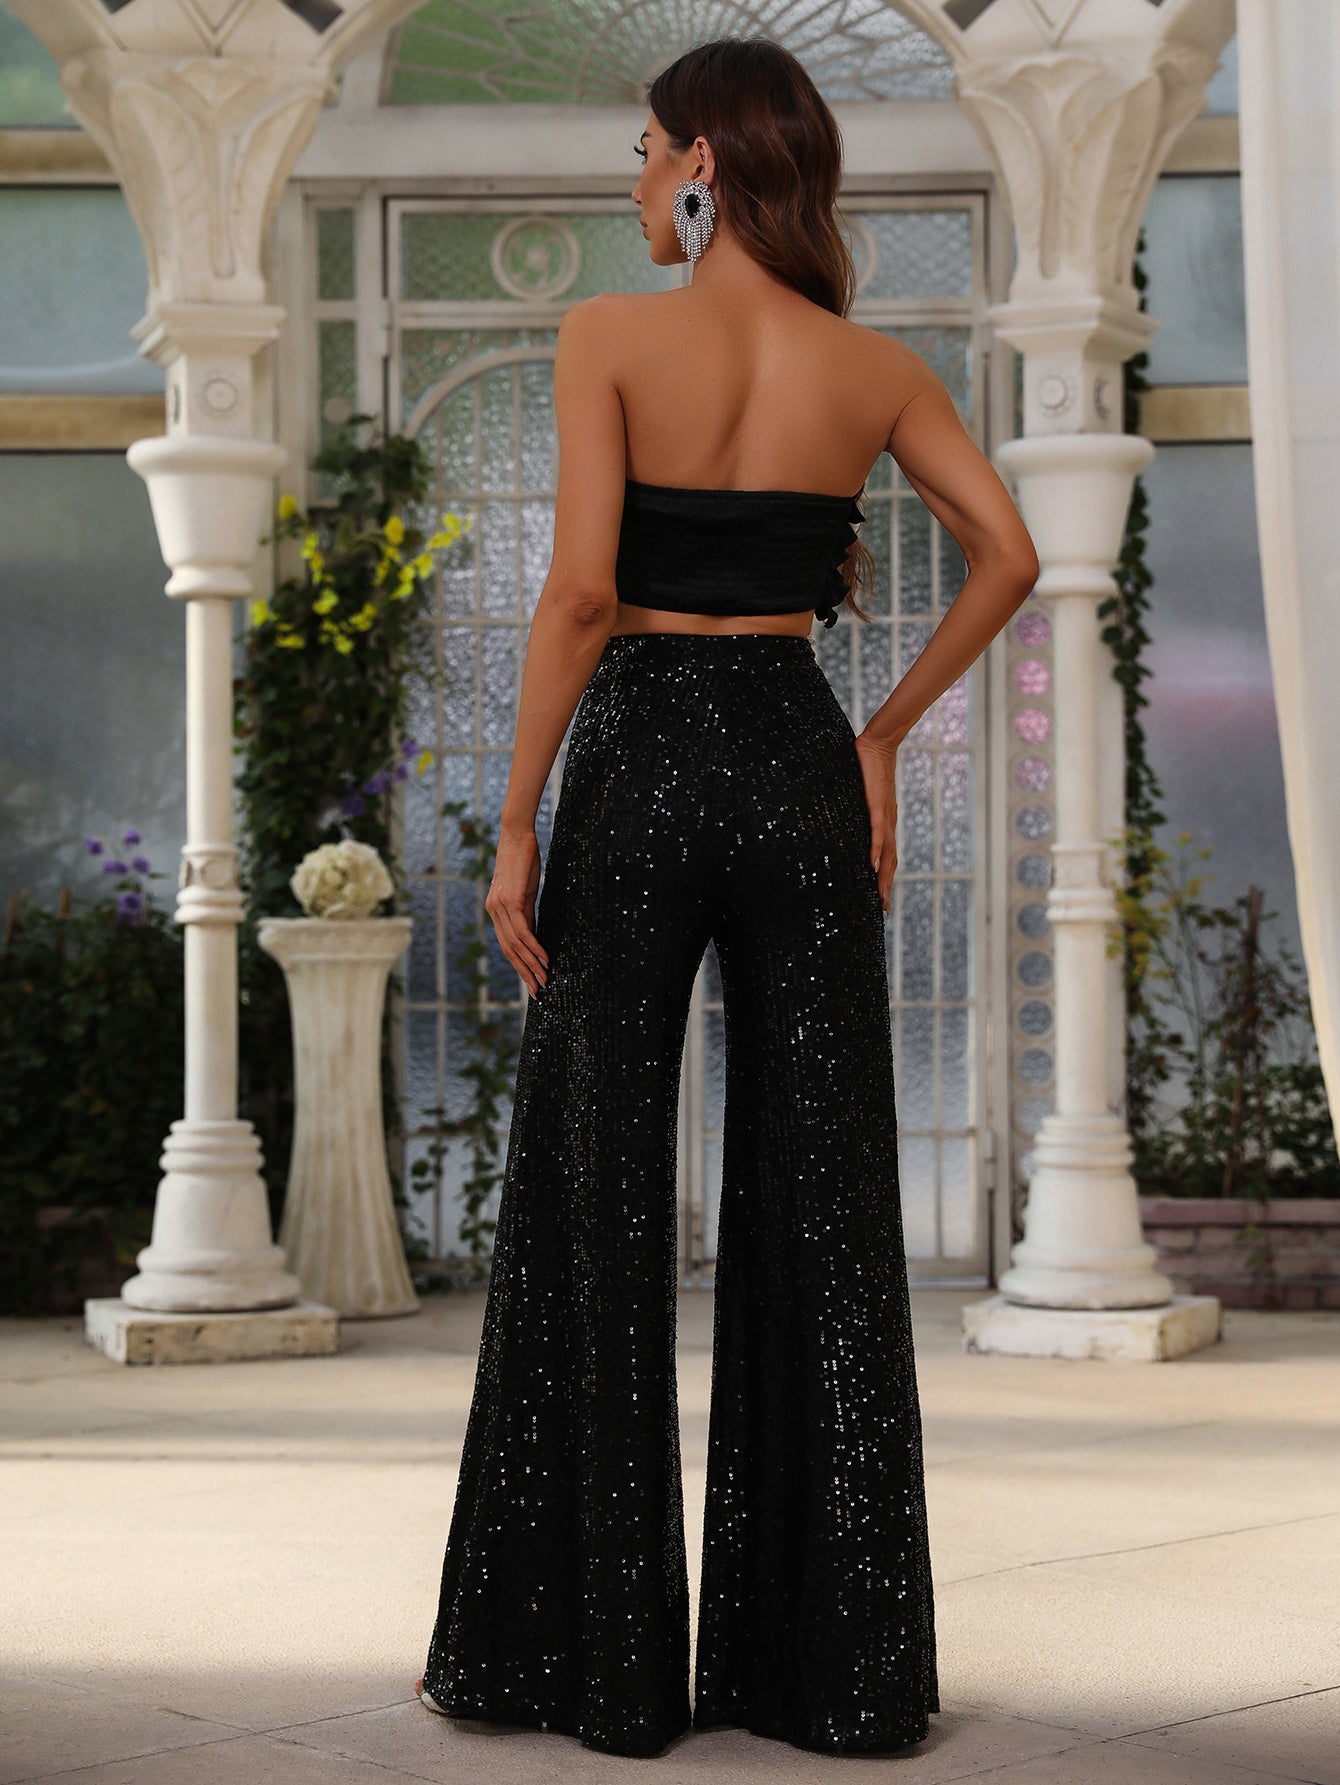 Fancy Black Two Piece Sequin Set Top With Ruffles